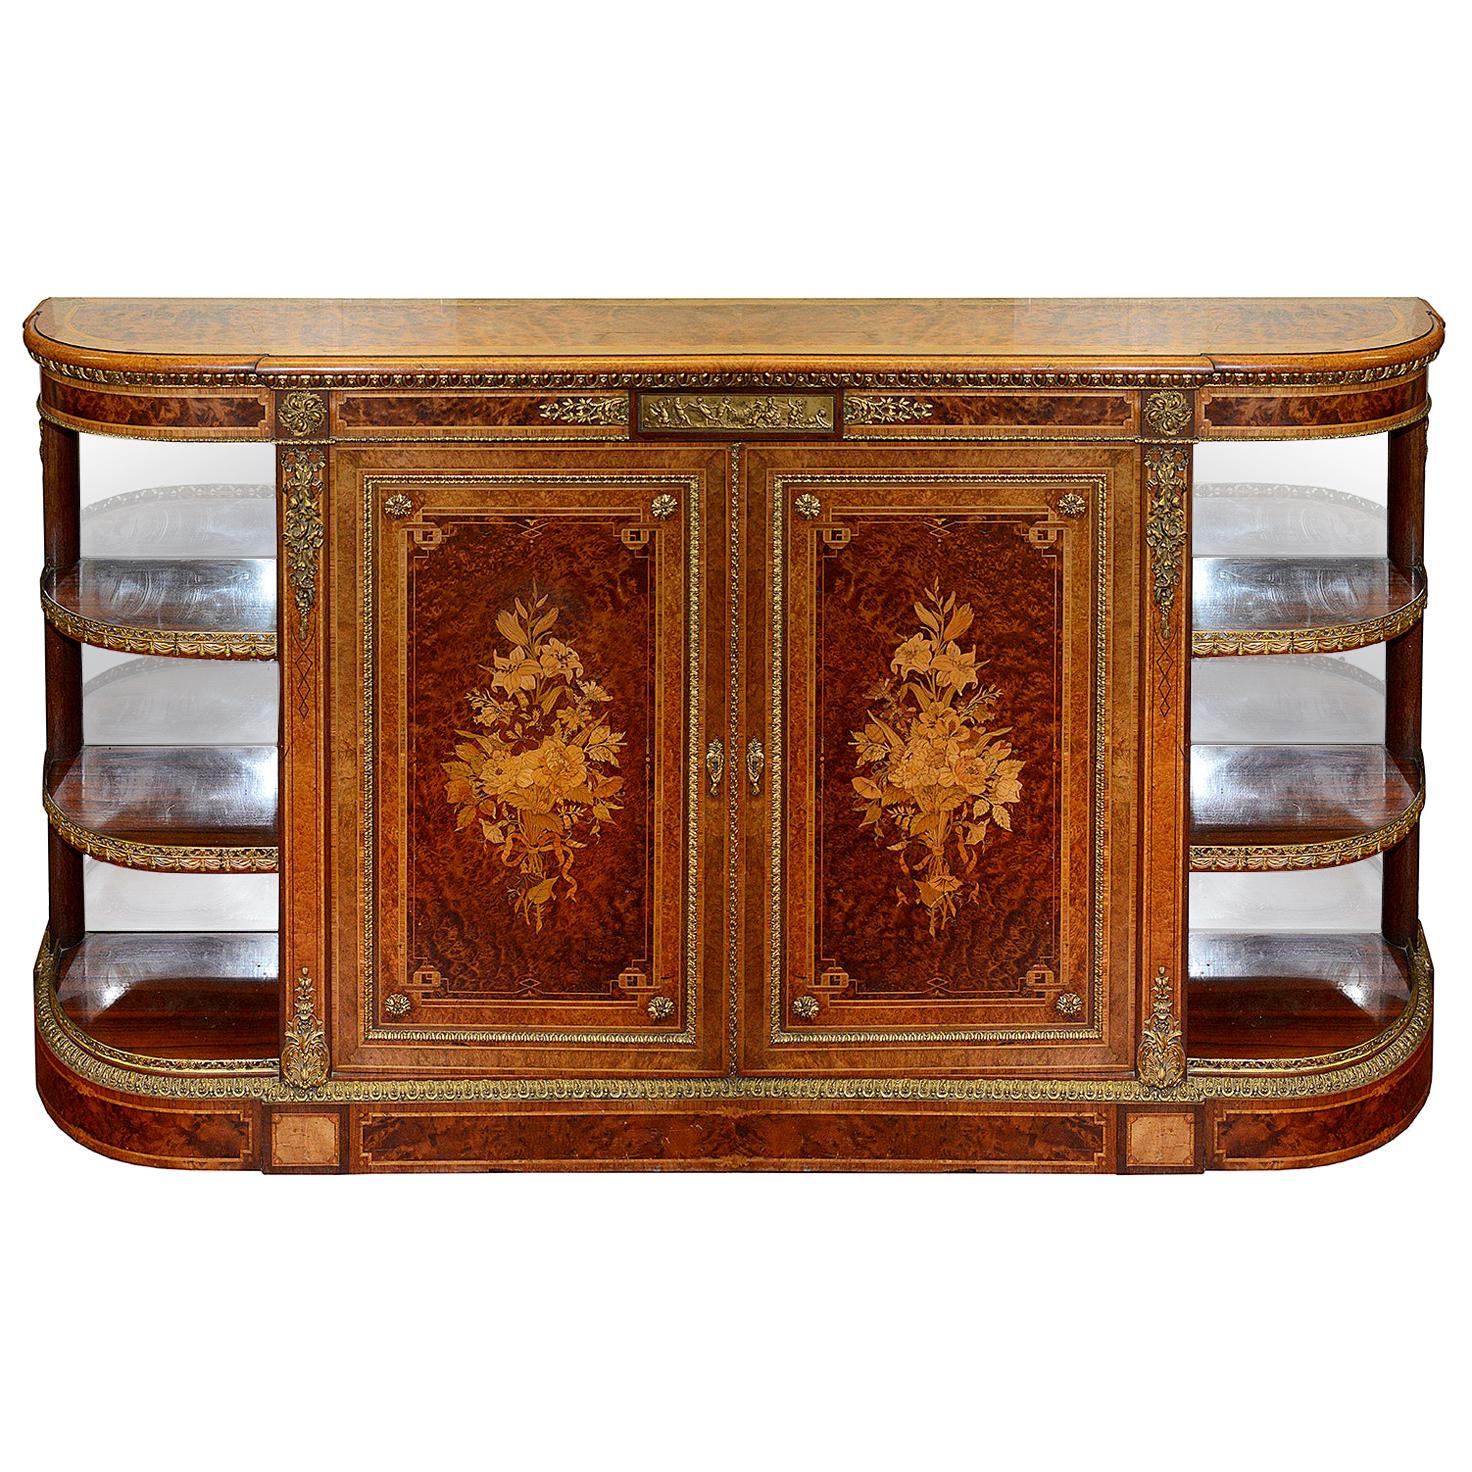 Fine Quality 19th Century Inlaid Credenza / Side Cabinet, by Lamb of Manchester